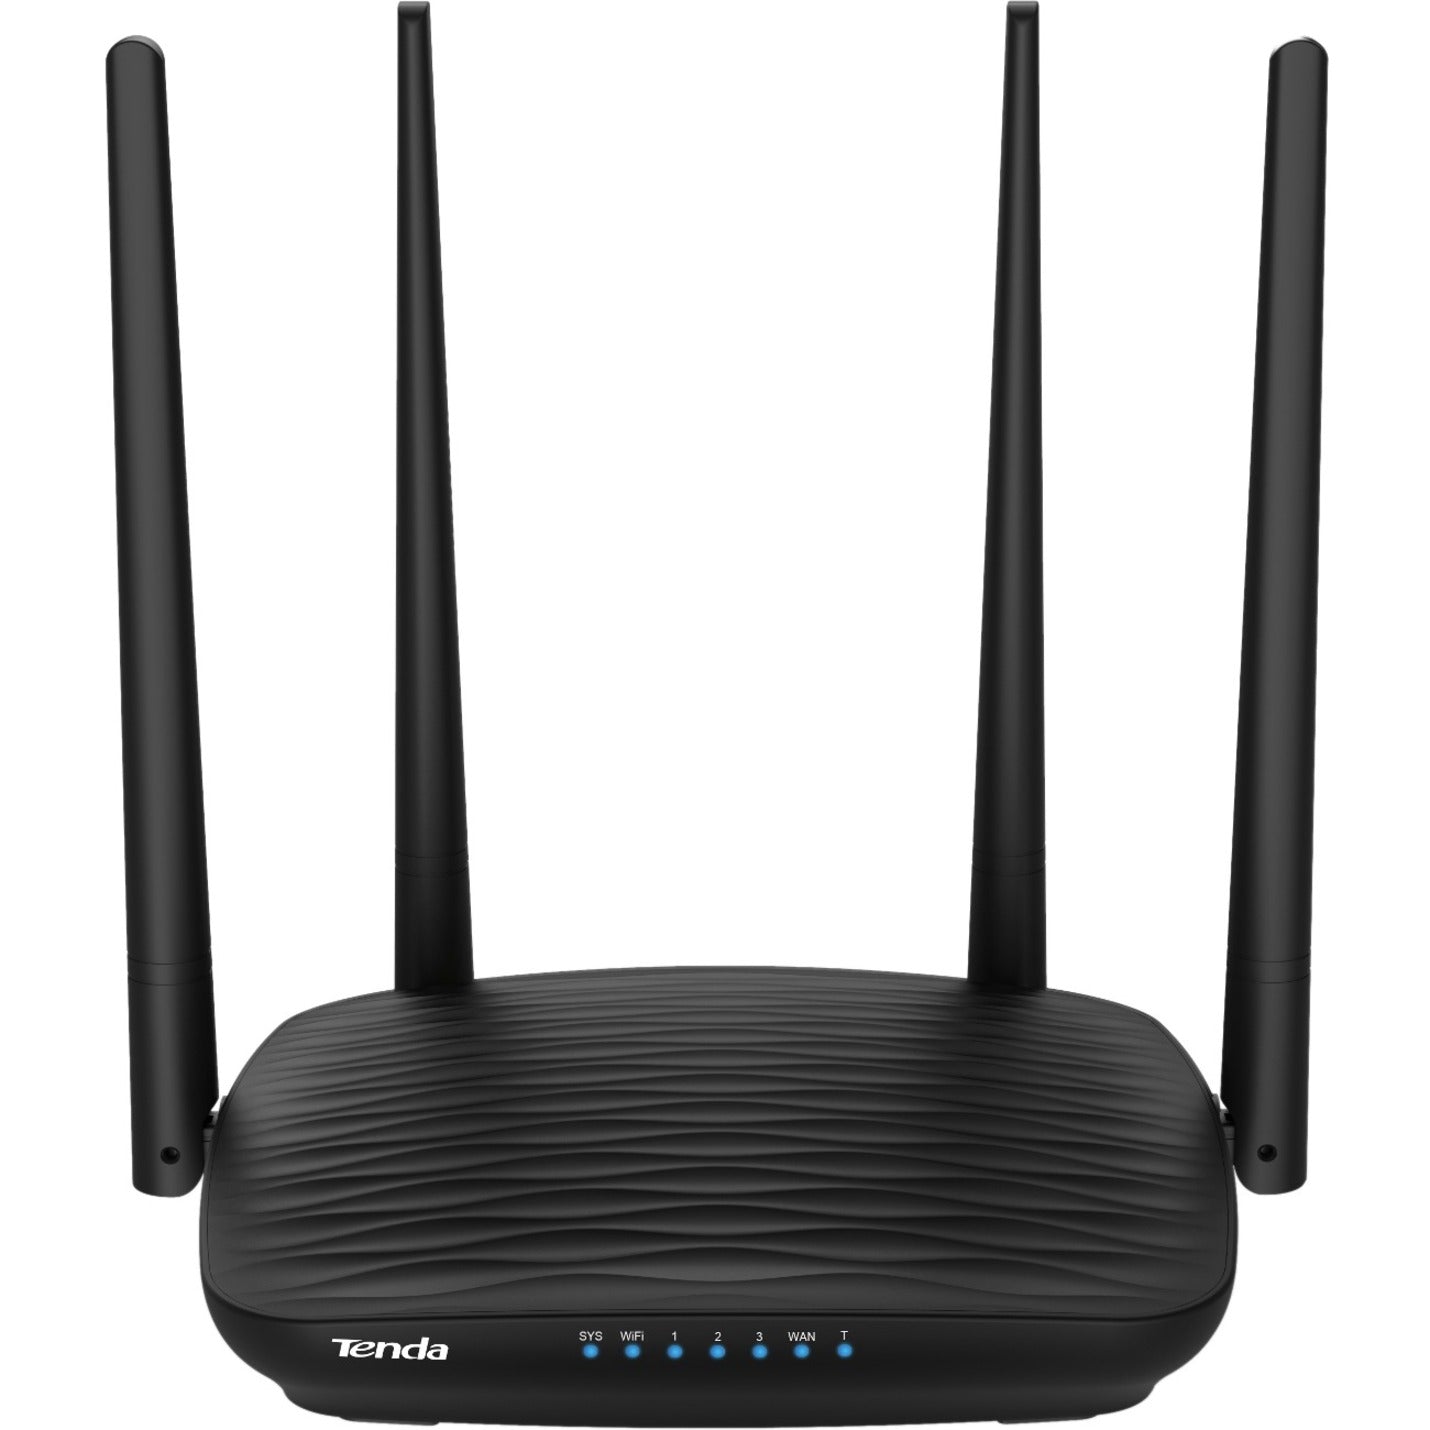 Tenda AC5 AC1200 Smart Dual-Band WiFi Router, Fast Ethernet, 145.88 MB/s